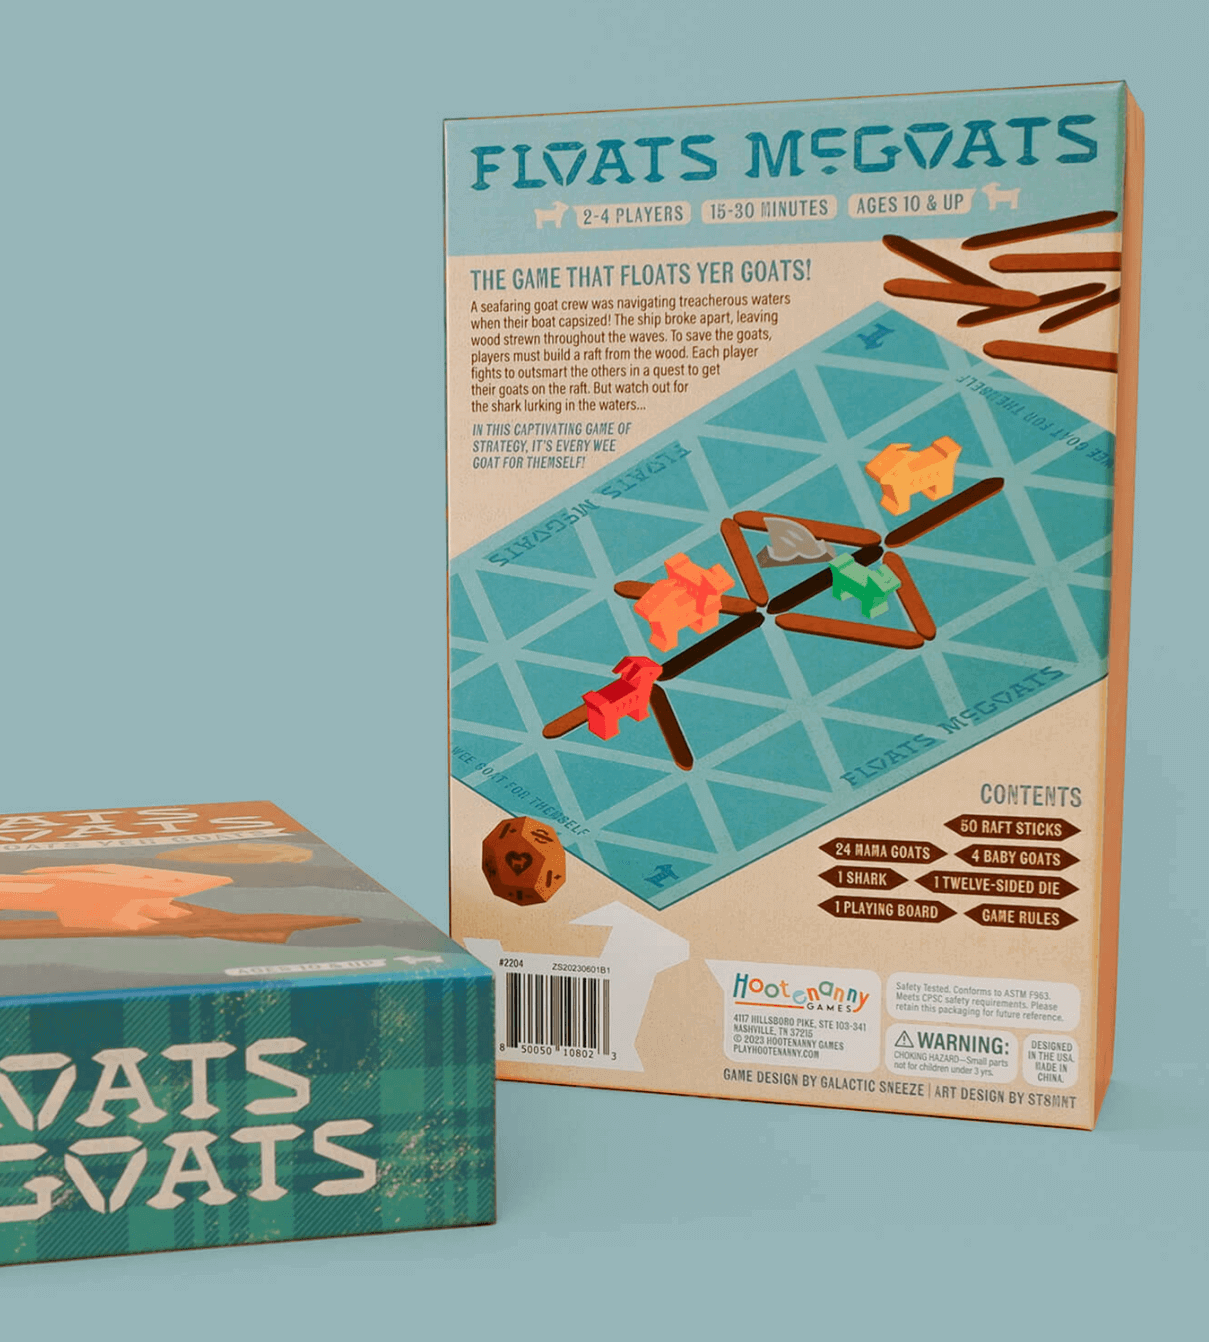 Floats McGoats board game back cover and side of box displayed as part of the package design by ST8MNT on blue background